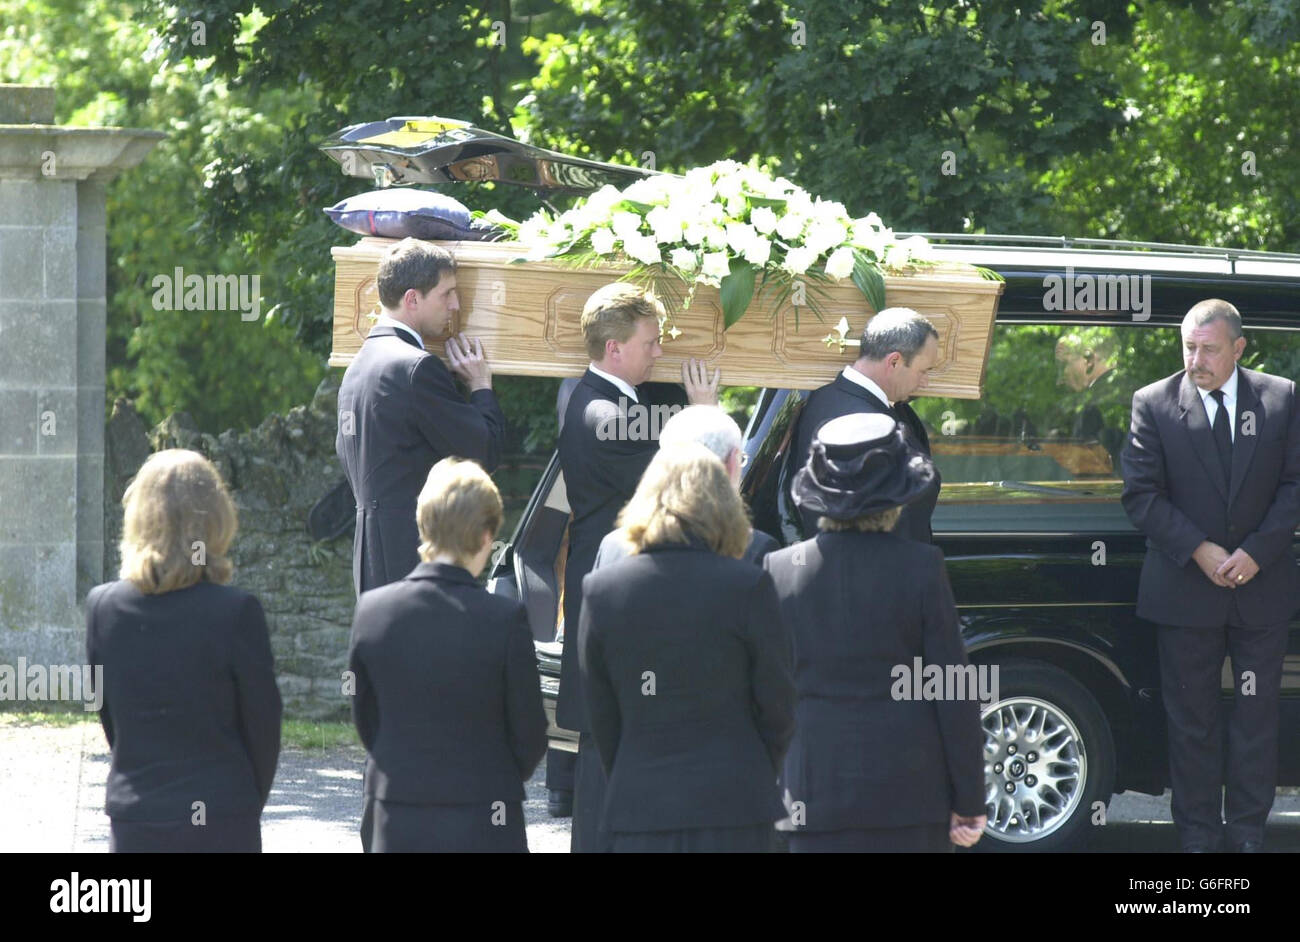 The coffin of Dr David Kelly is carried by family members as his wife and three daughters look on at St Mary's Church in Longworth, Oxfordshire. A private funeral was being held today for the government weapons expert at St Mary's Church, overlooking the spot where the doctor is believed to have committed suicide. Around 160 mourners were expected to join the family of Dr Kelly at the funeral. Stock Photo